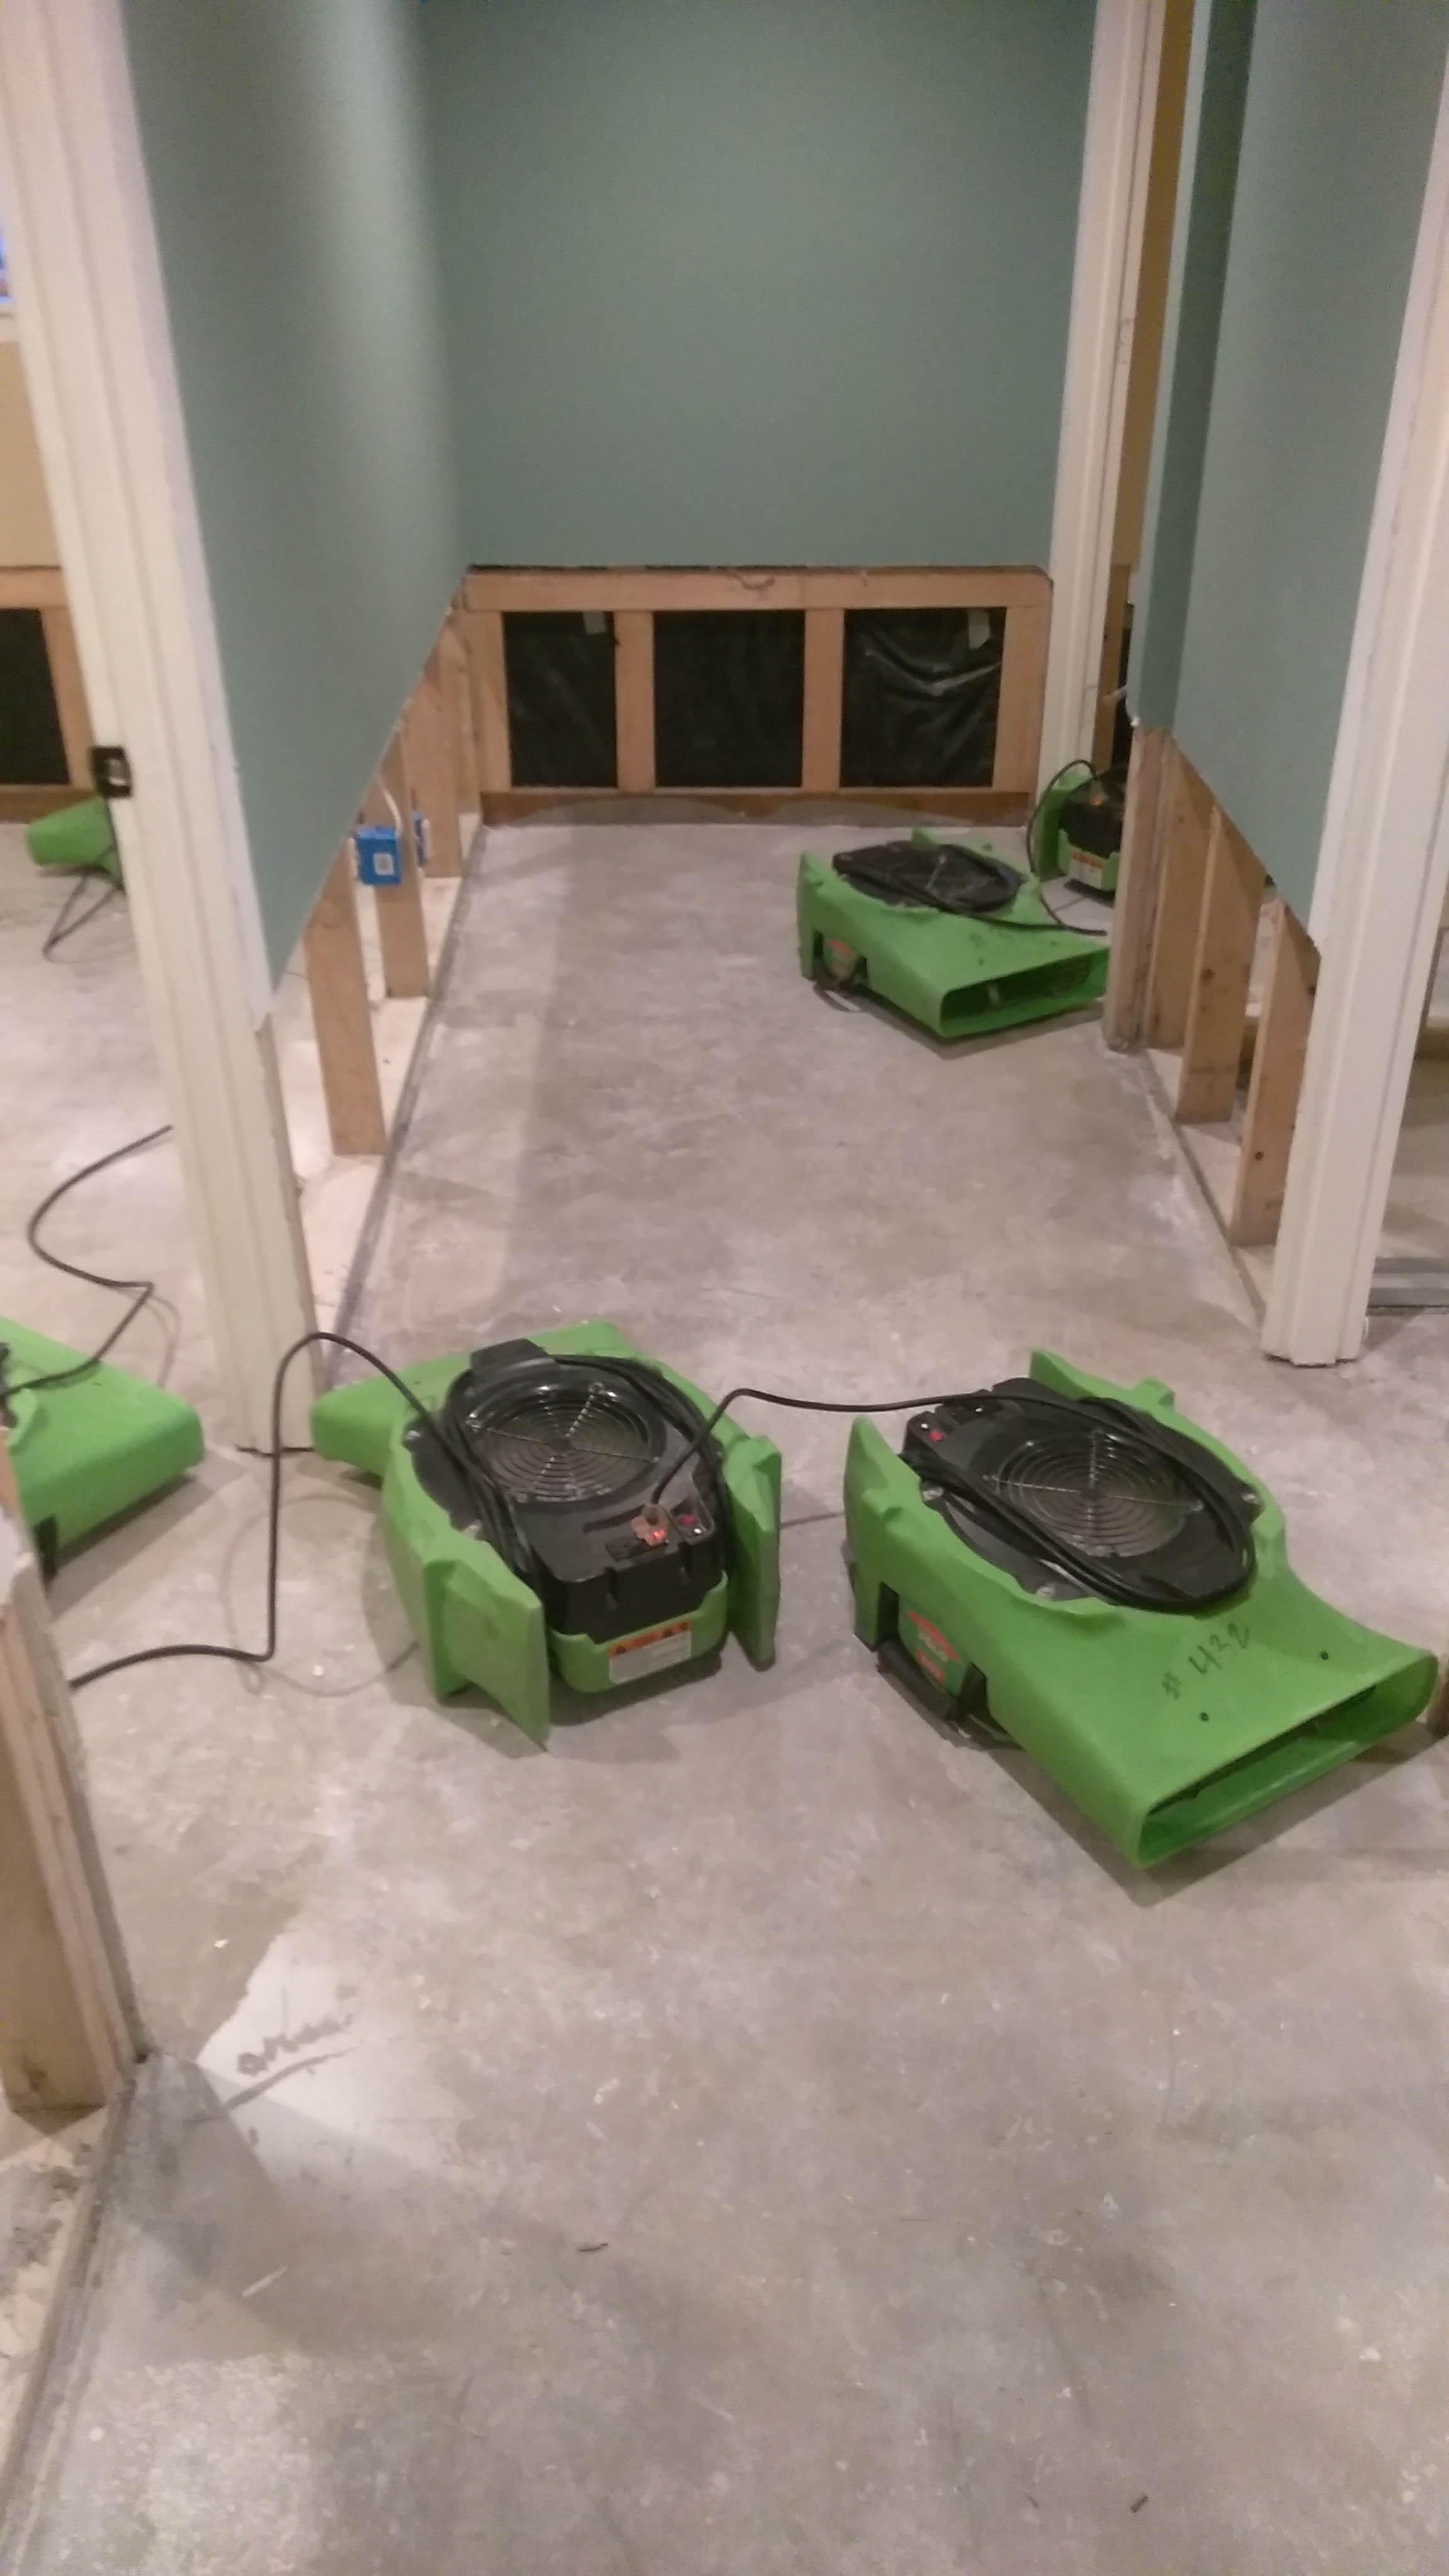 SERVPRO of East Bellevue is ready for your call! We are happy to help with any and all water damage jobs you can throw our way.